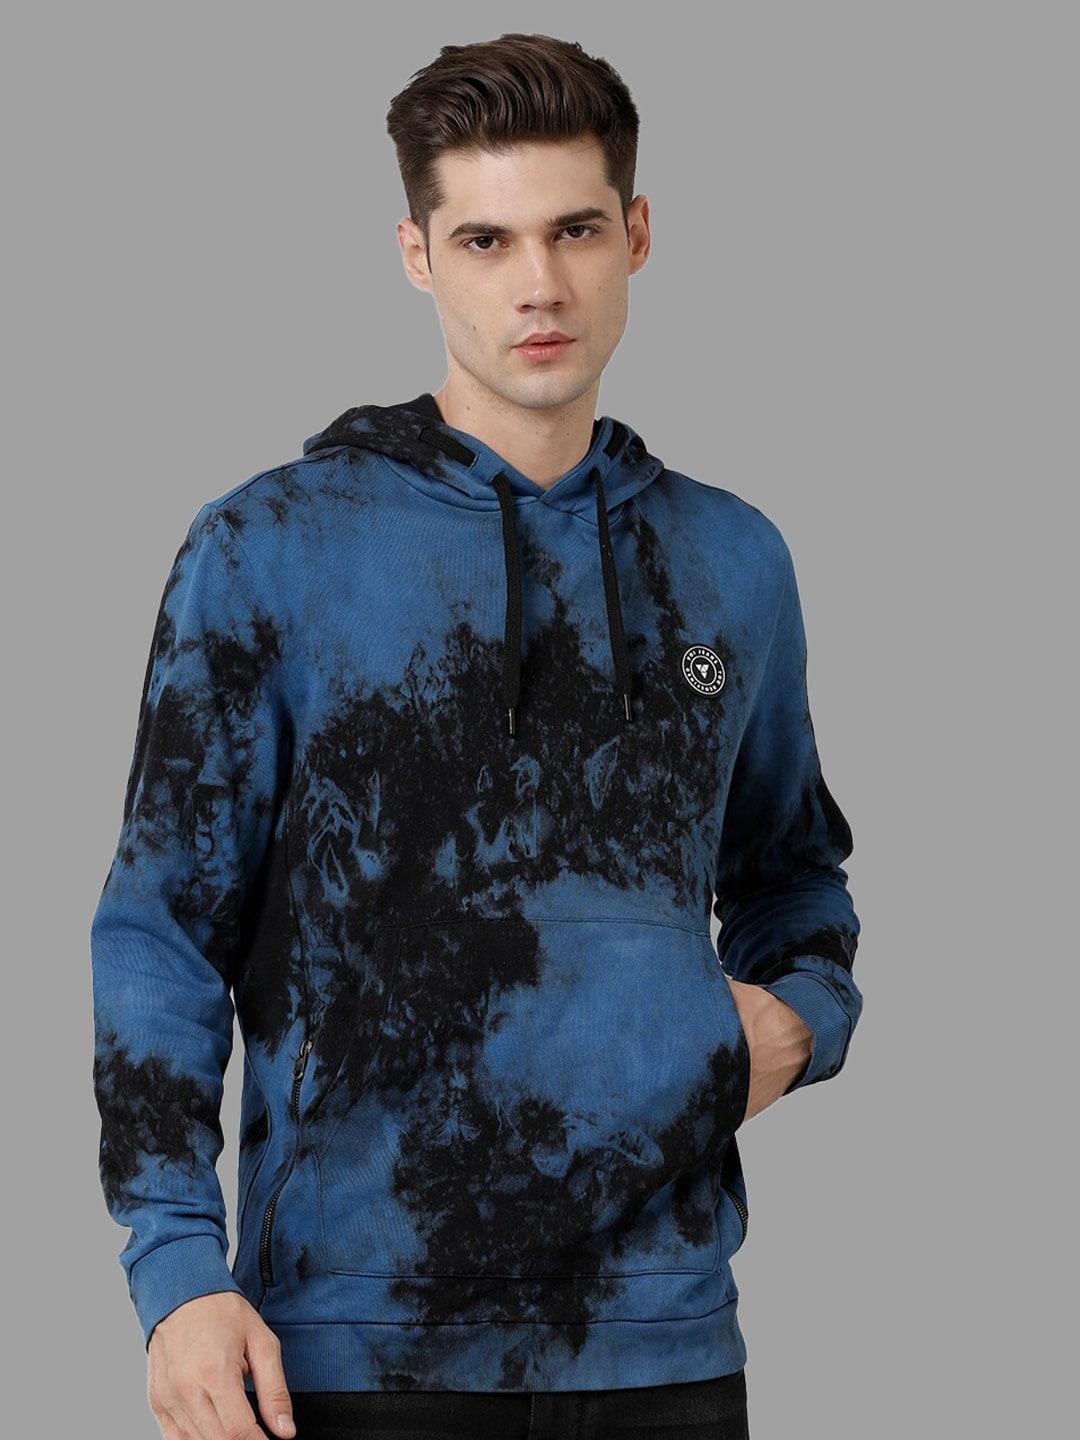 Voi Jeans Abstract Printed Hooded Pure Cotton Pullover Sweatshirt